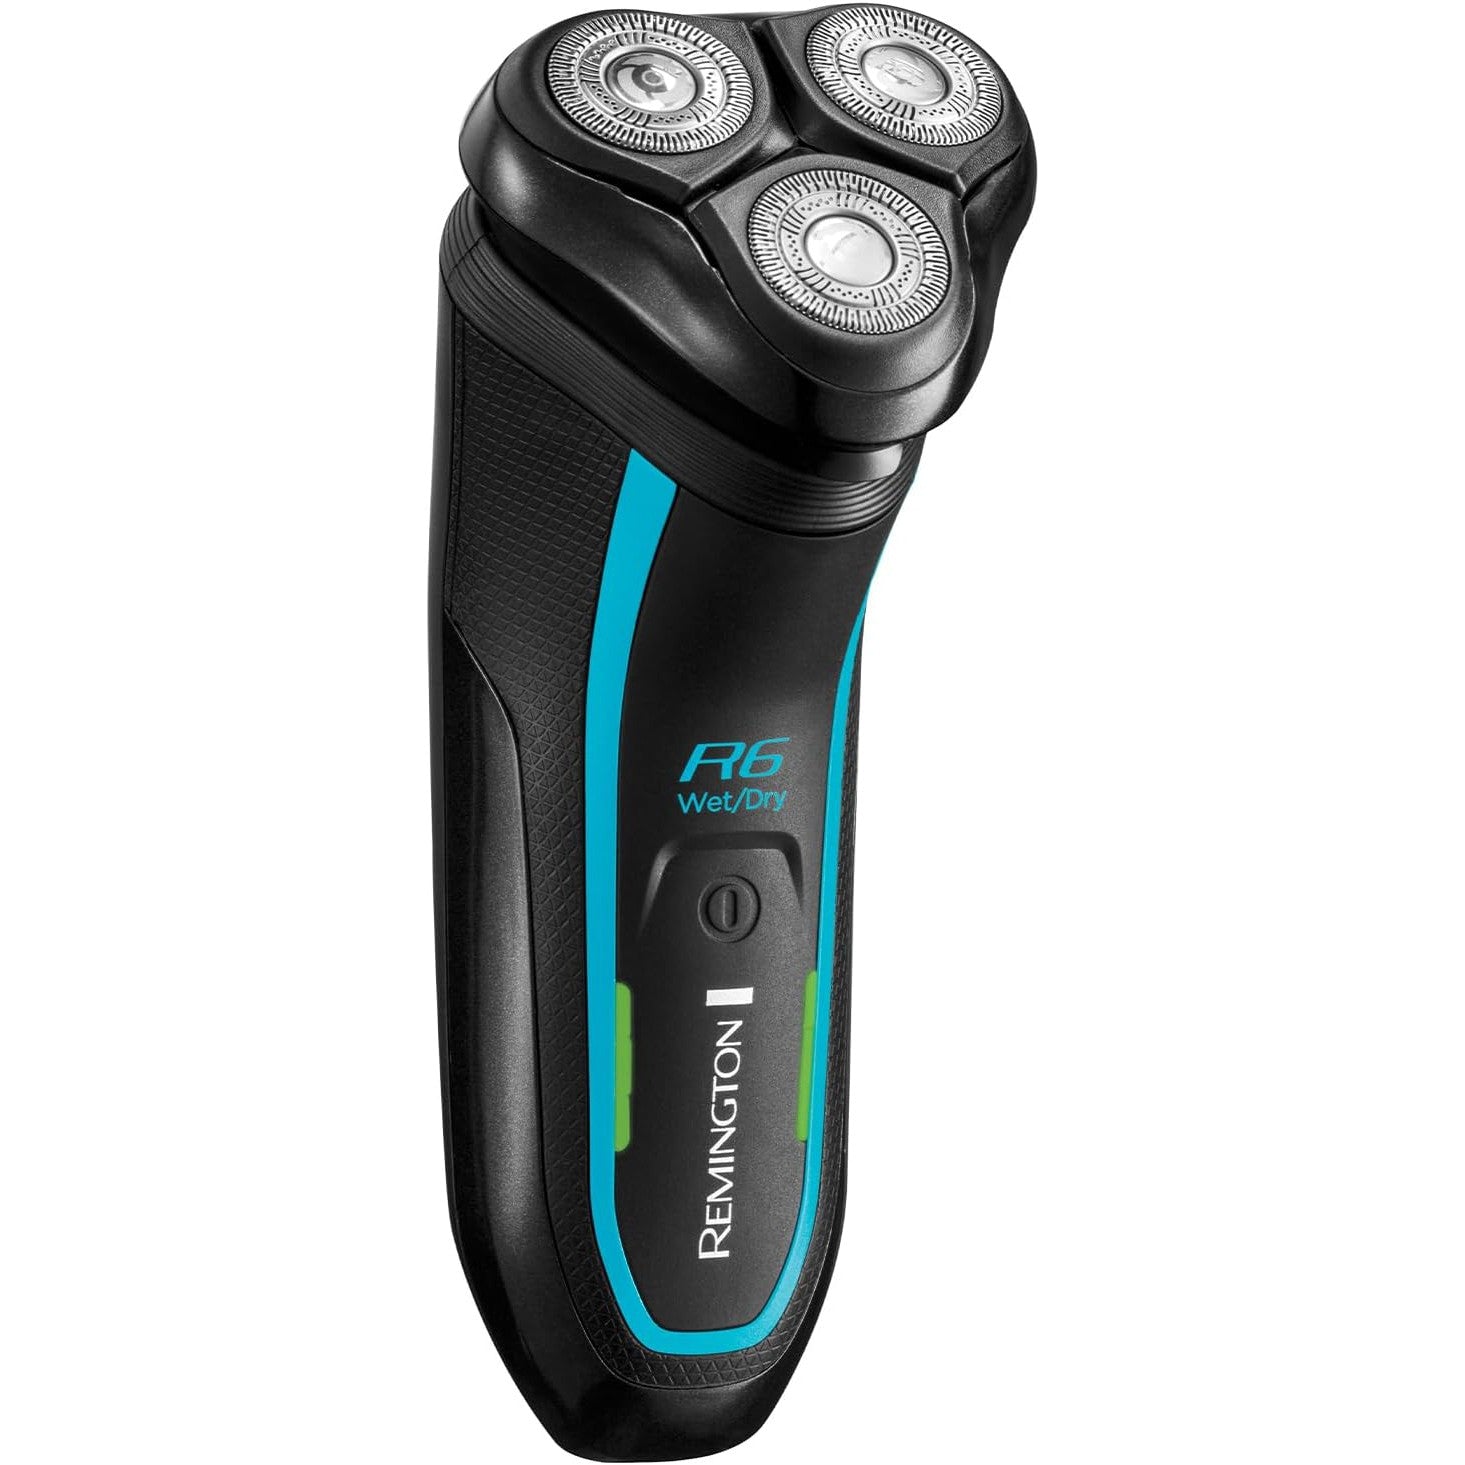 Remington R6 Aqua Wet & Dry Mens Electric Rotary Shaver (100% Waterproof, Pop up trimmer, 60min usage, 90min charge, 5min Quick charge, Cordless, USB Charging, Travel pouch) R6000